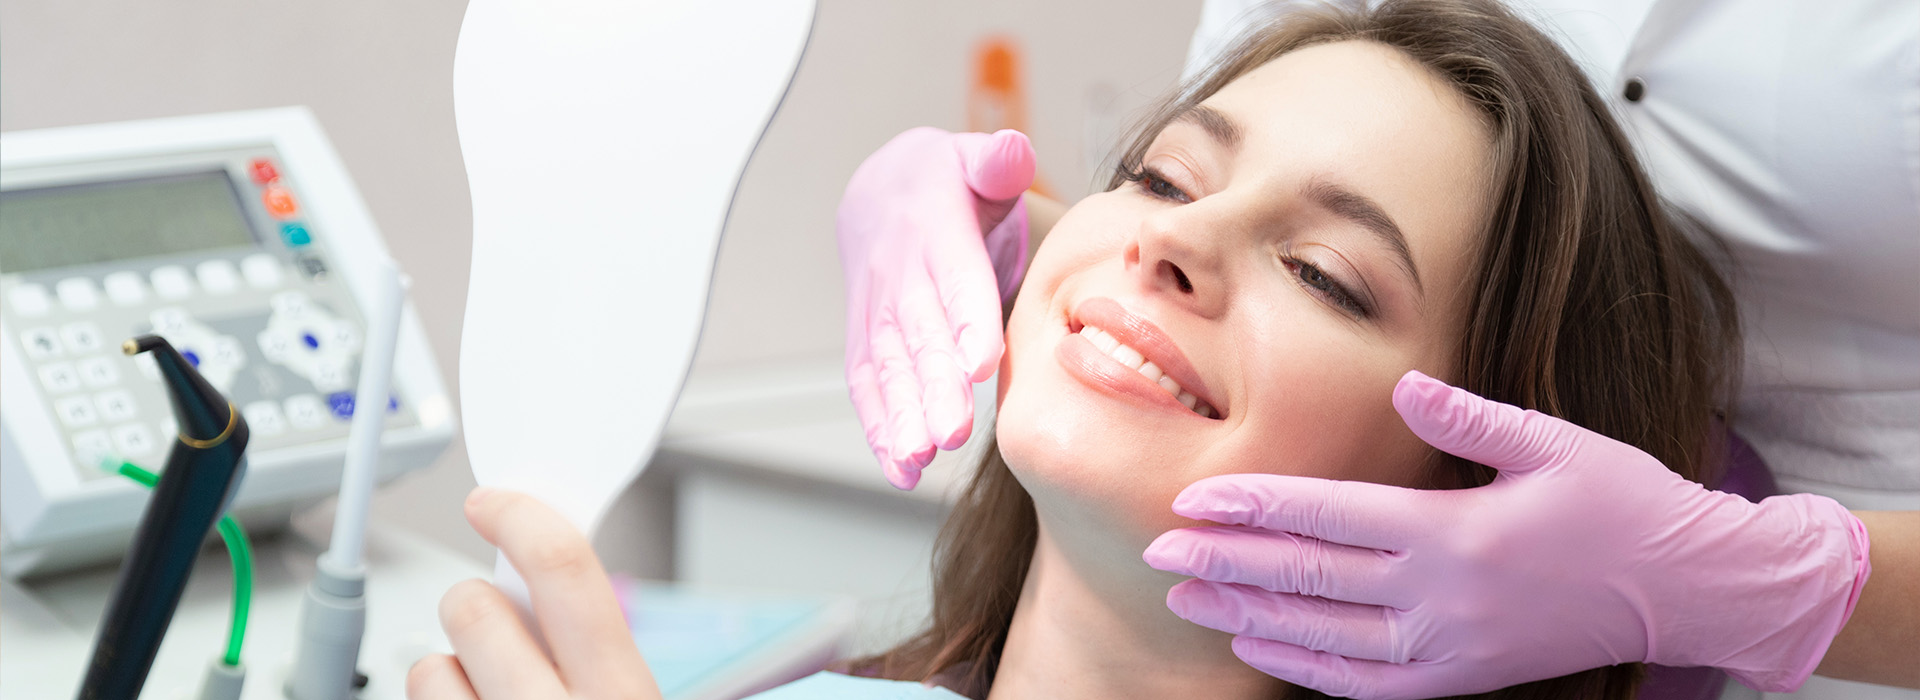 Cherry Hill Dental Excellence | Dental Emergencies, Cosmetic Dentistry and Periodontics